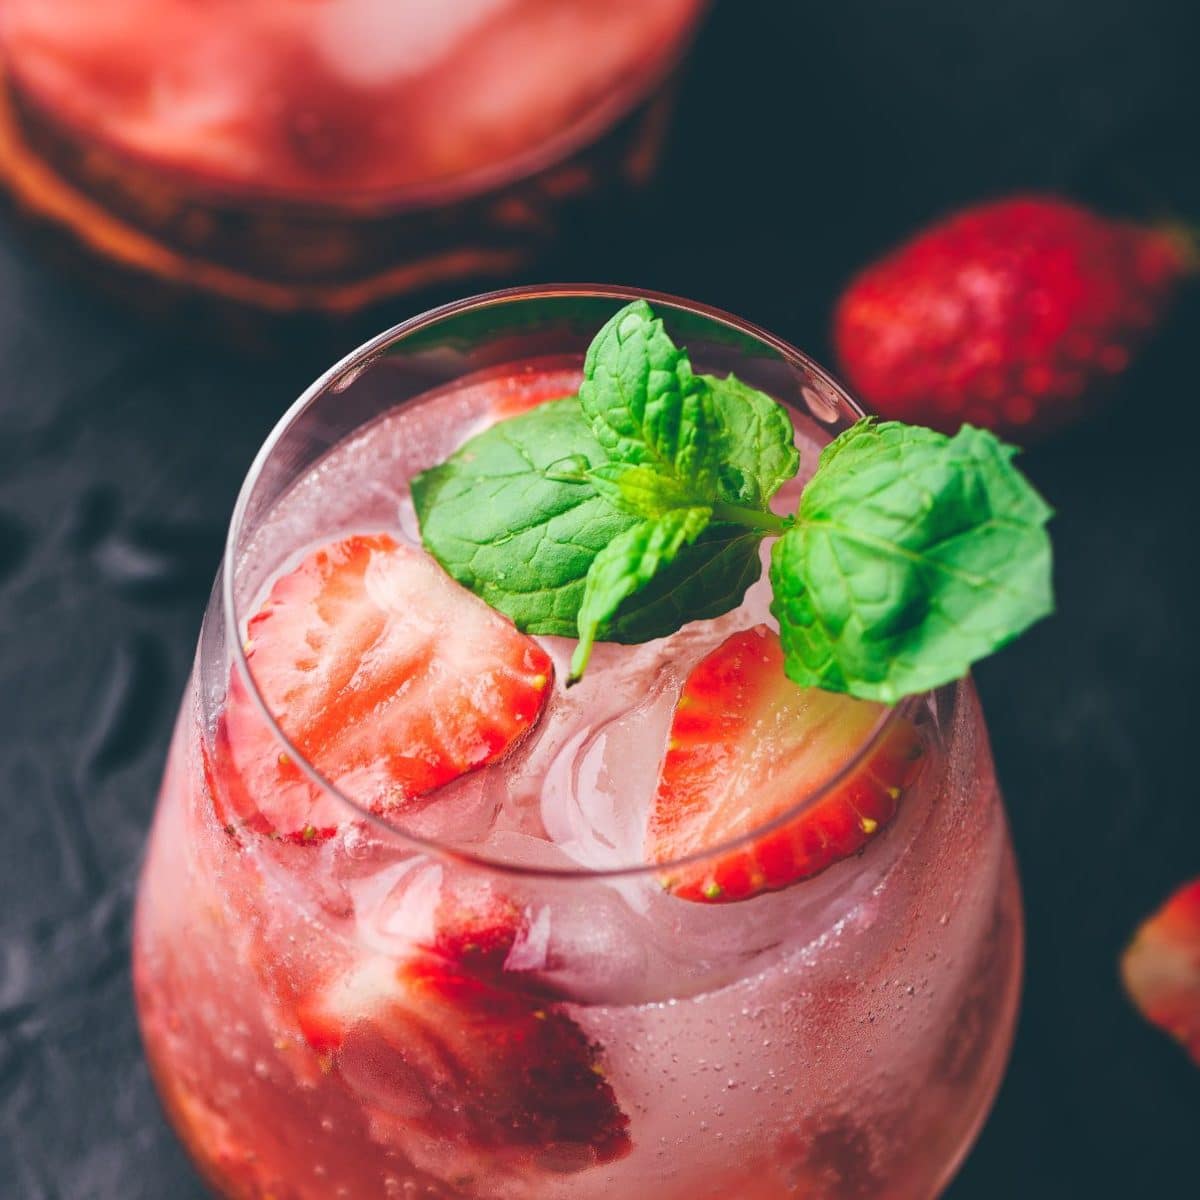 Strawberry Gin and Tonic